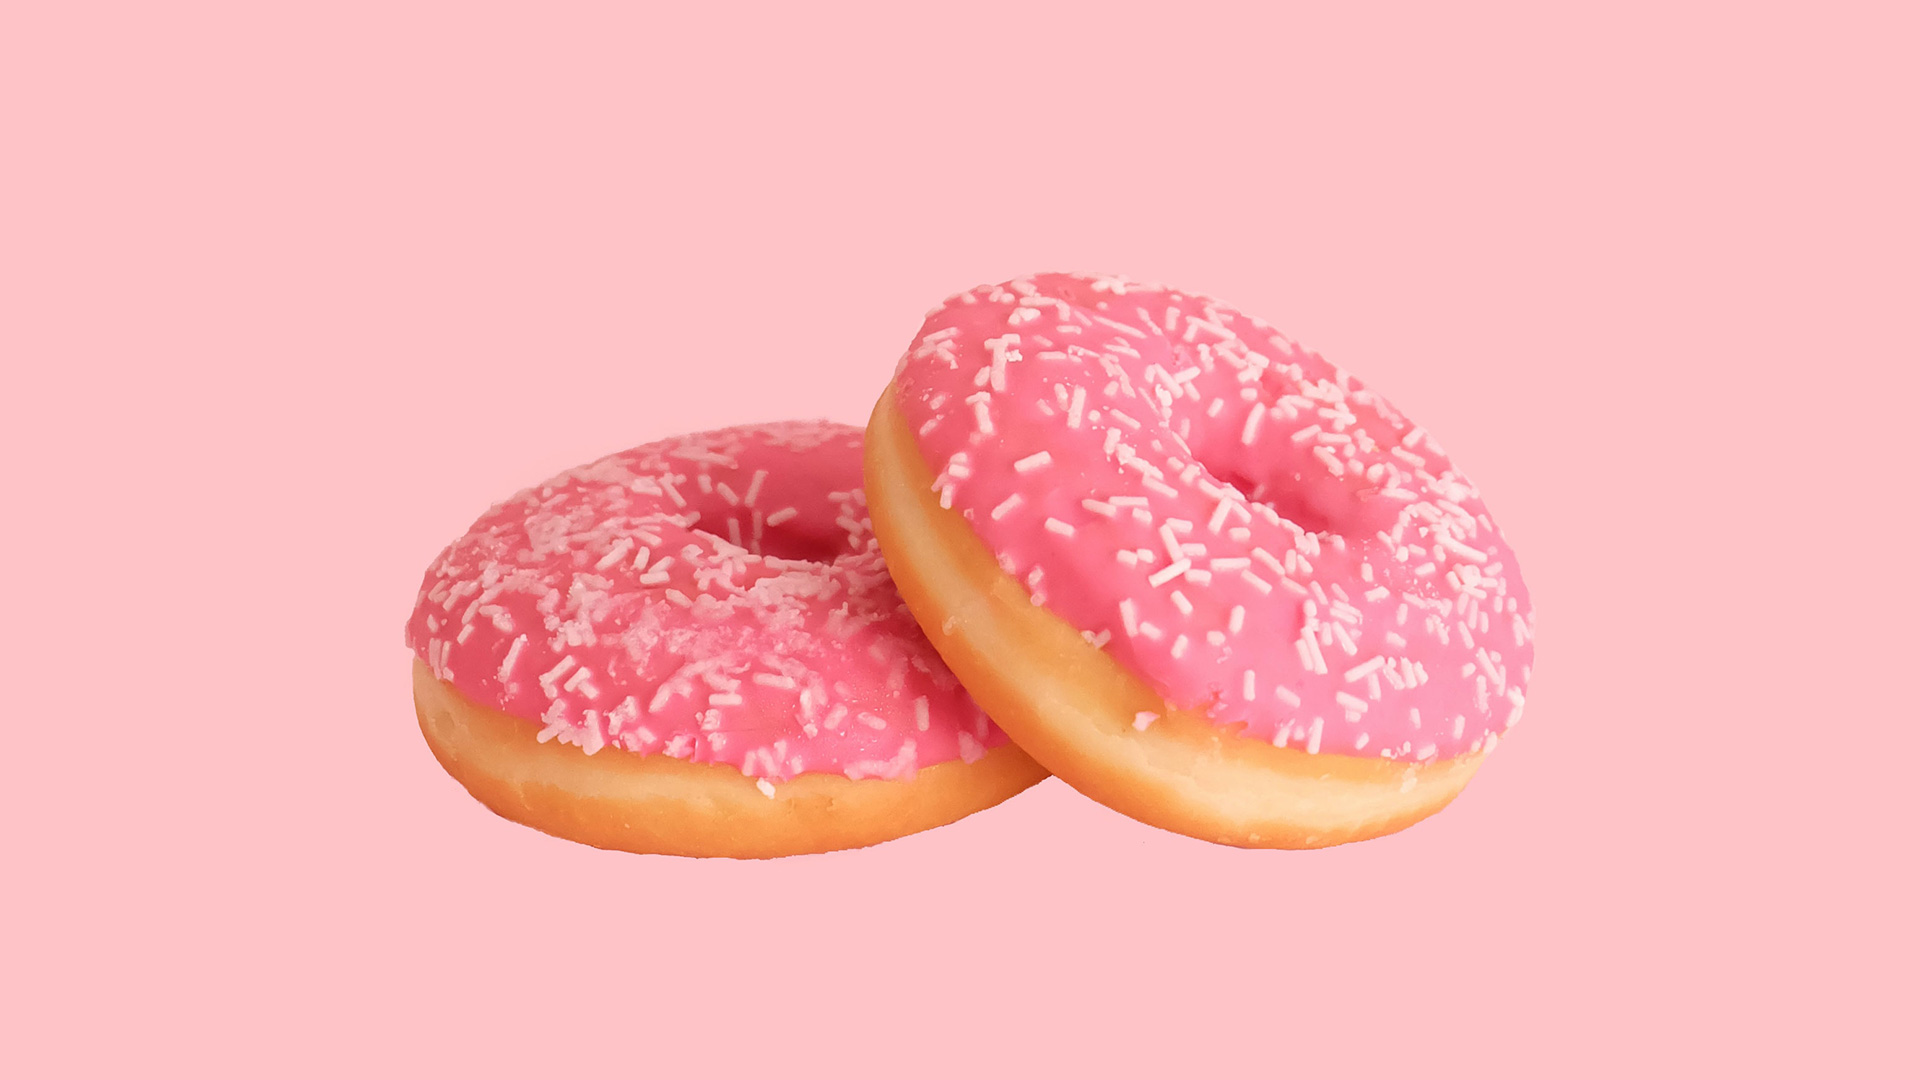 Two doughnuts with pink icing